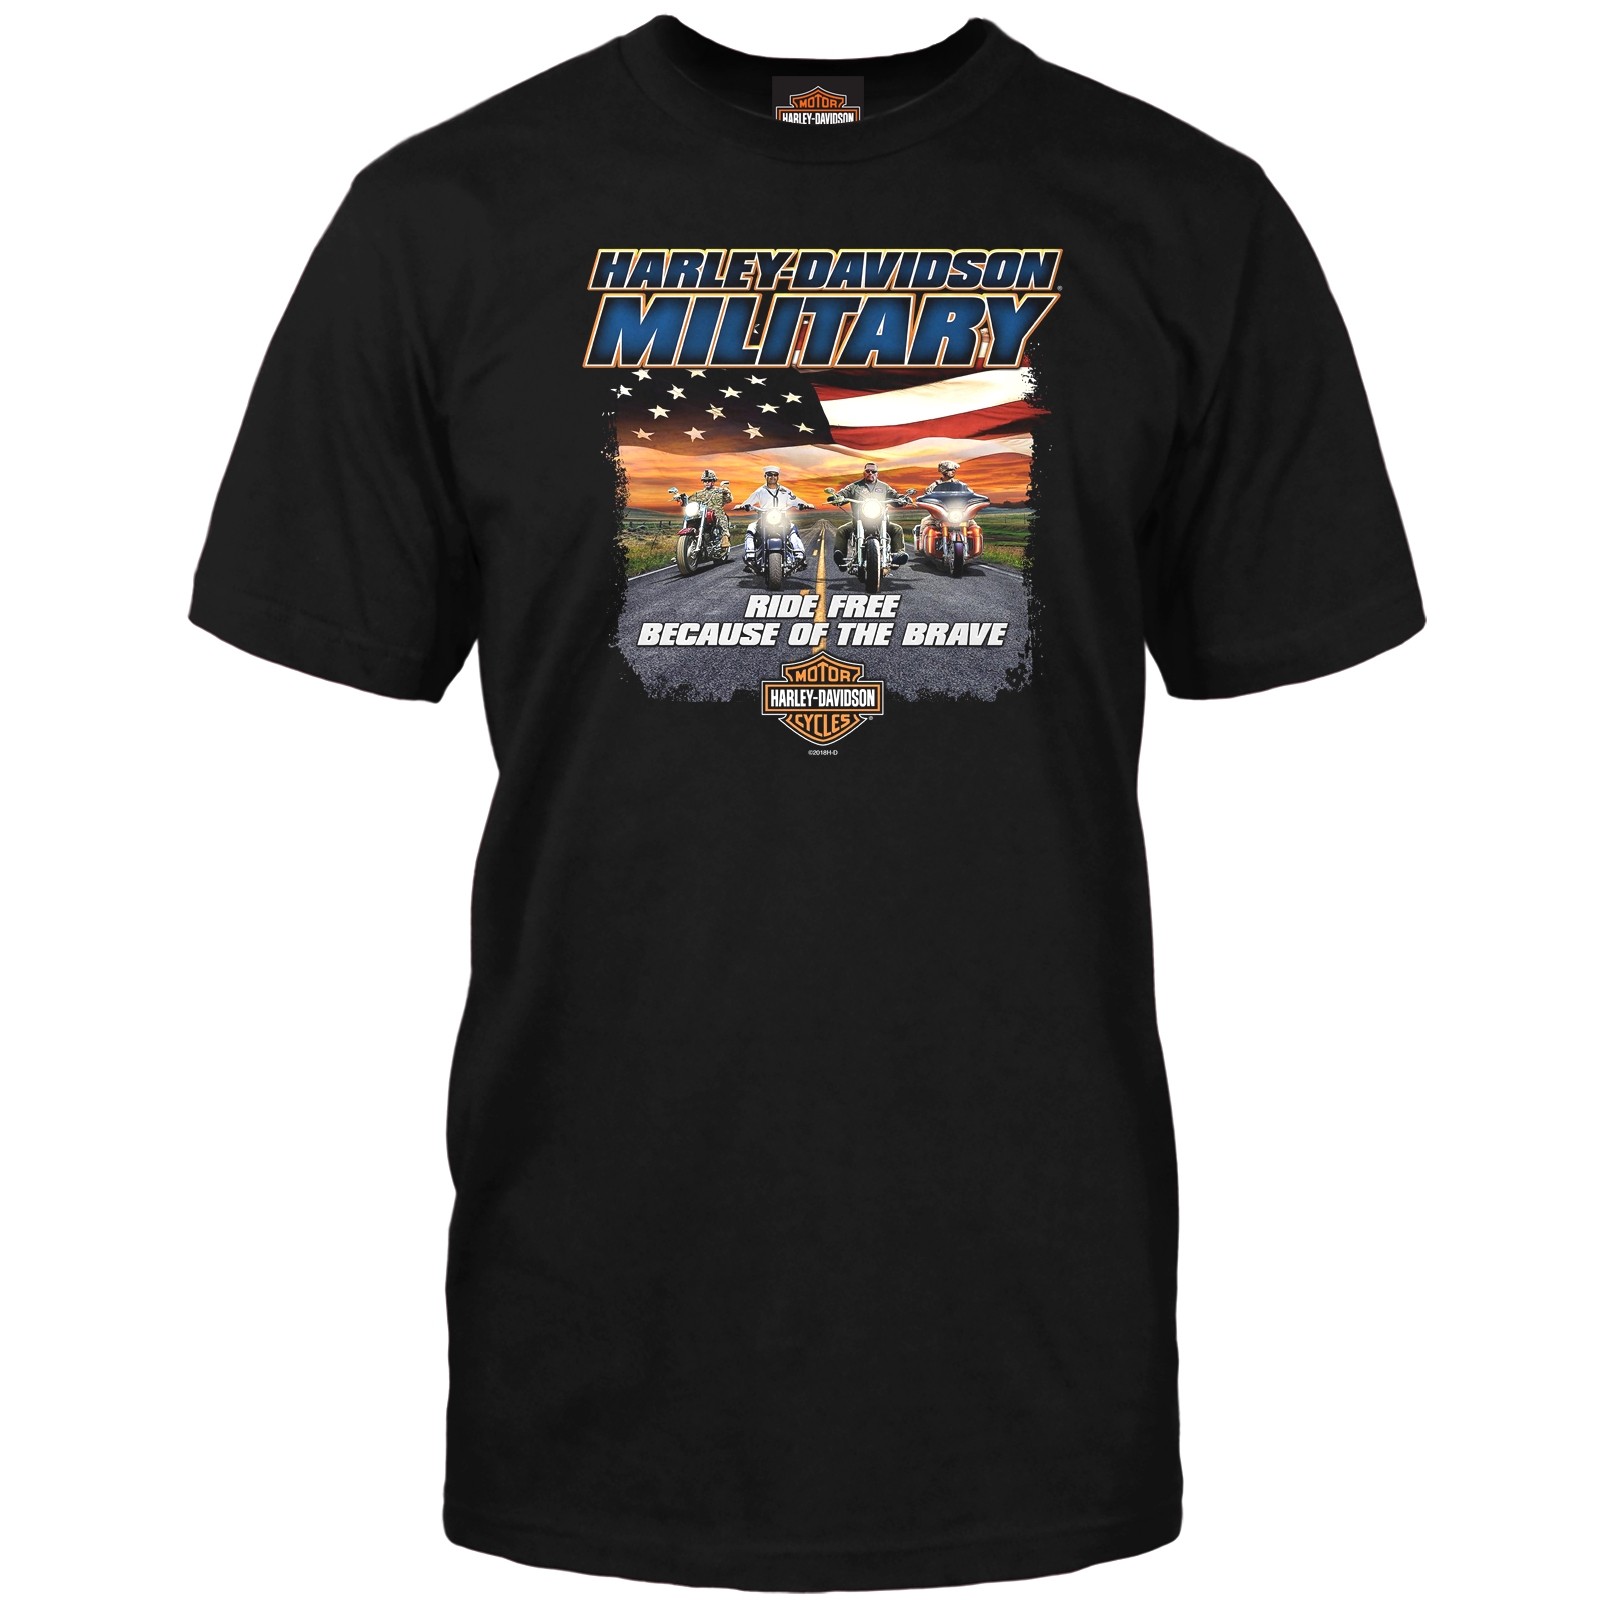  Harley  Davidson  Military  Exclusive Graphic T  shirt  